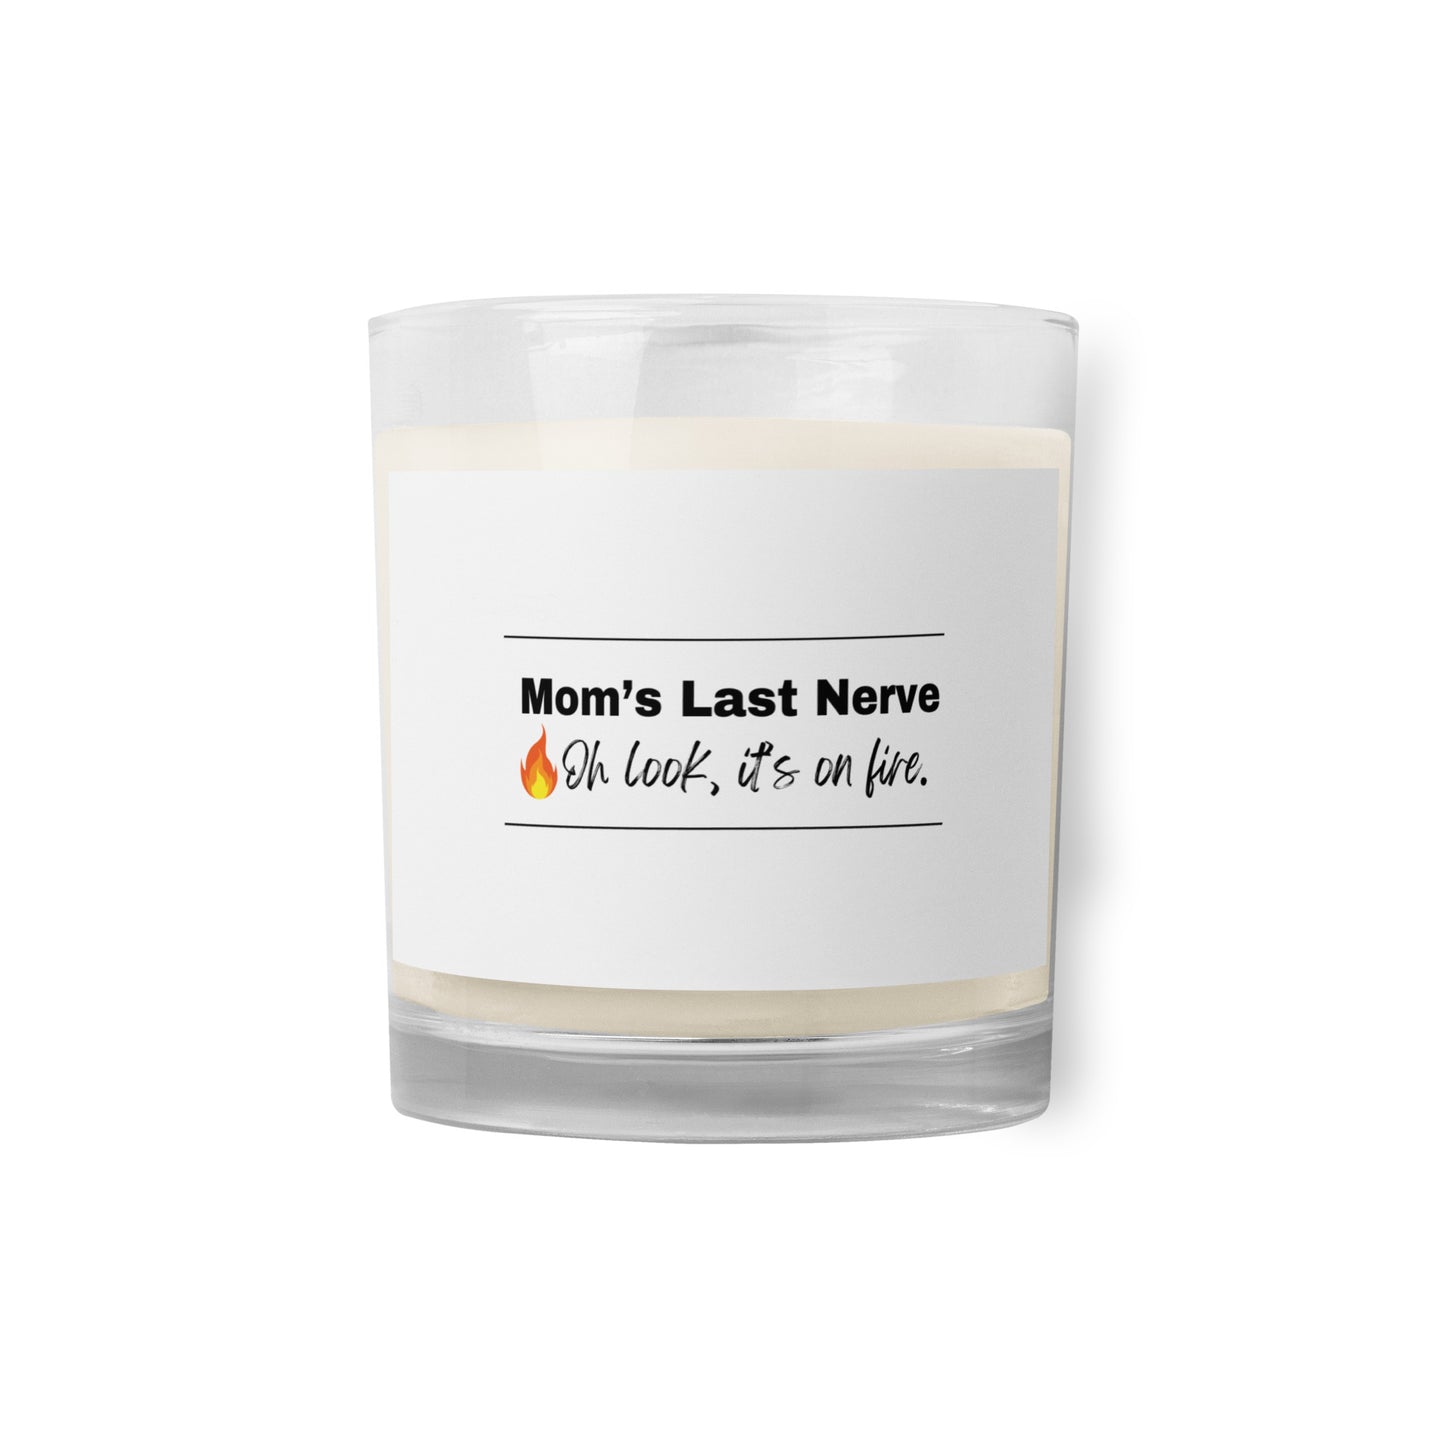 MOM'S LAST NERVE - Glass Jar Soy Wax Candle